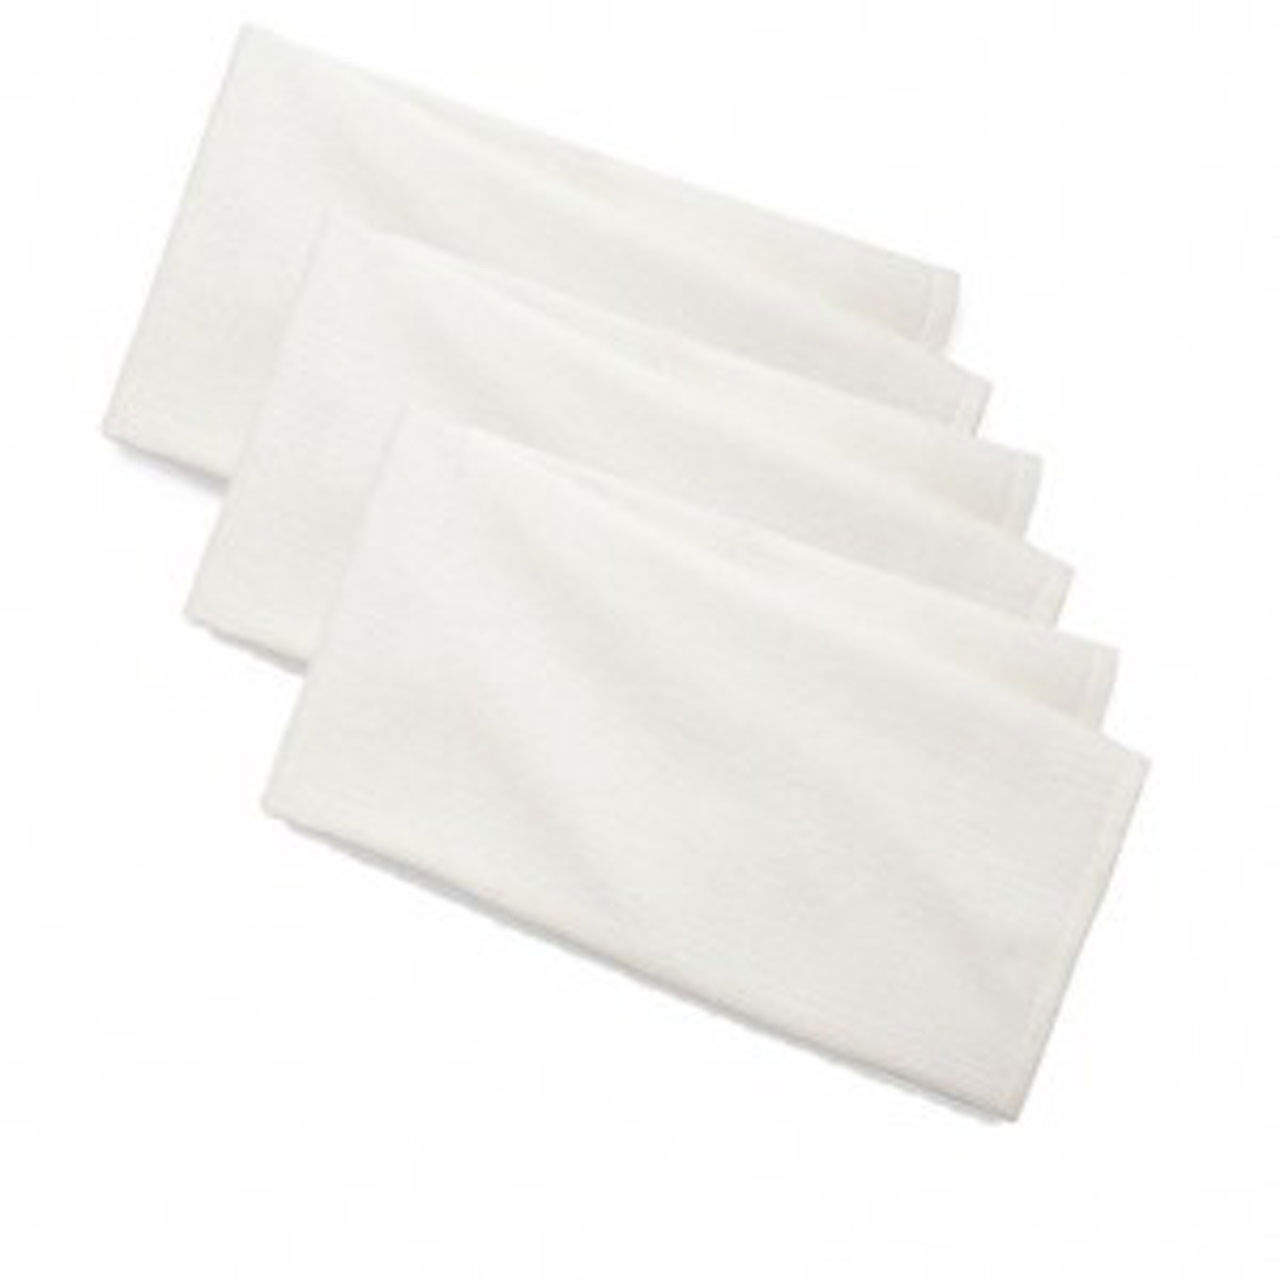 What features do huck towels provide for wholesale buyers?